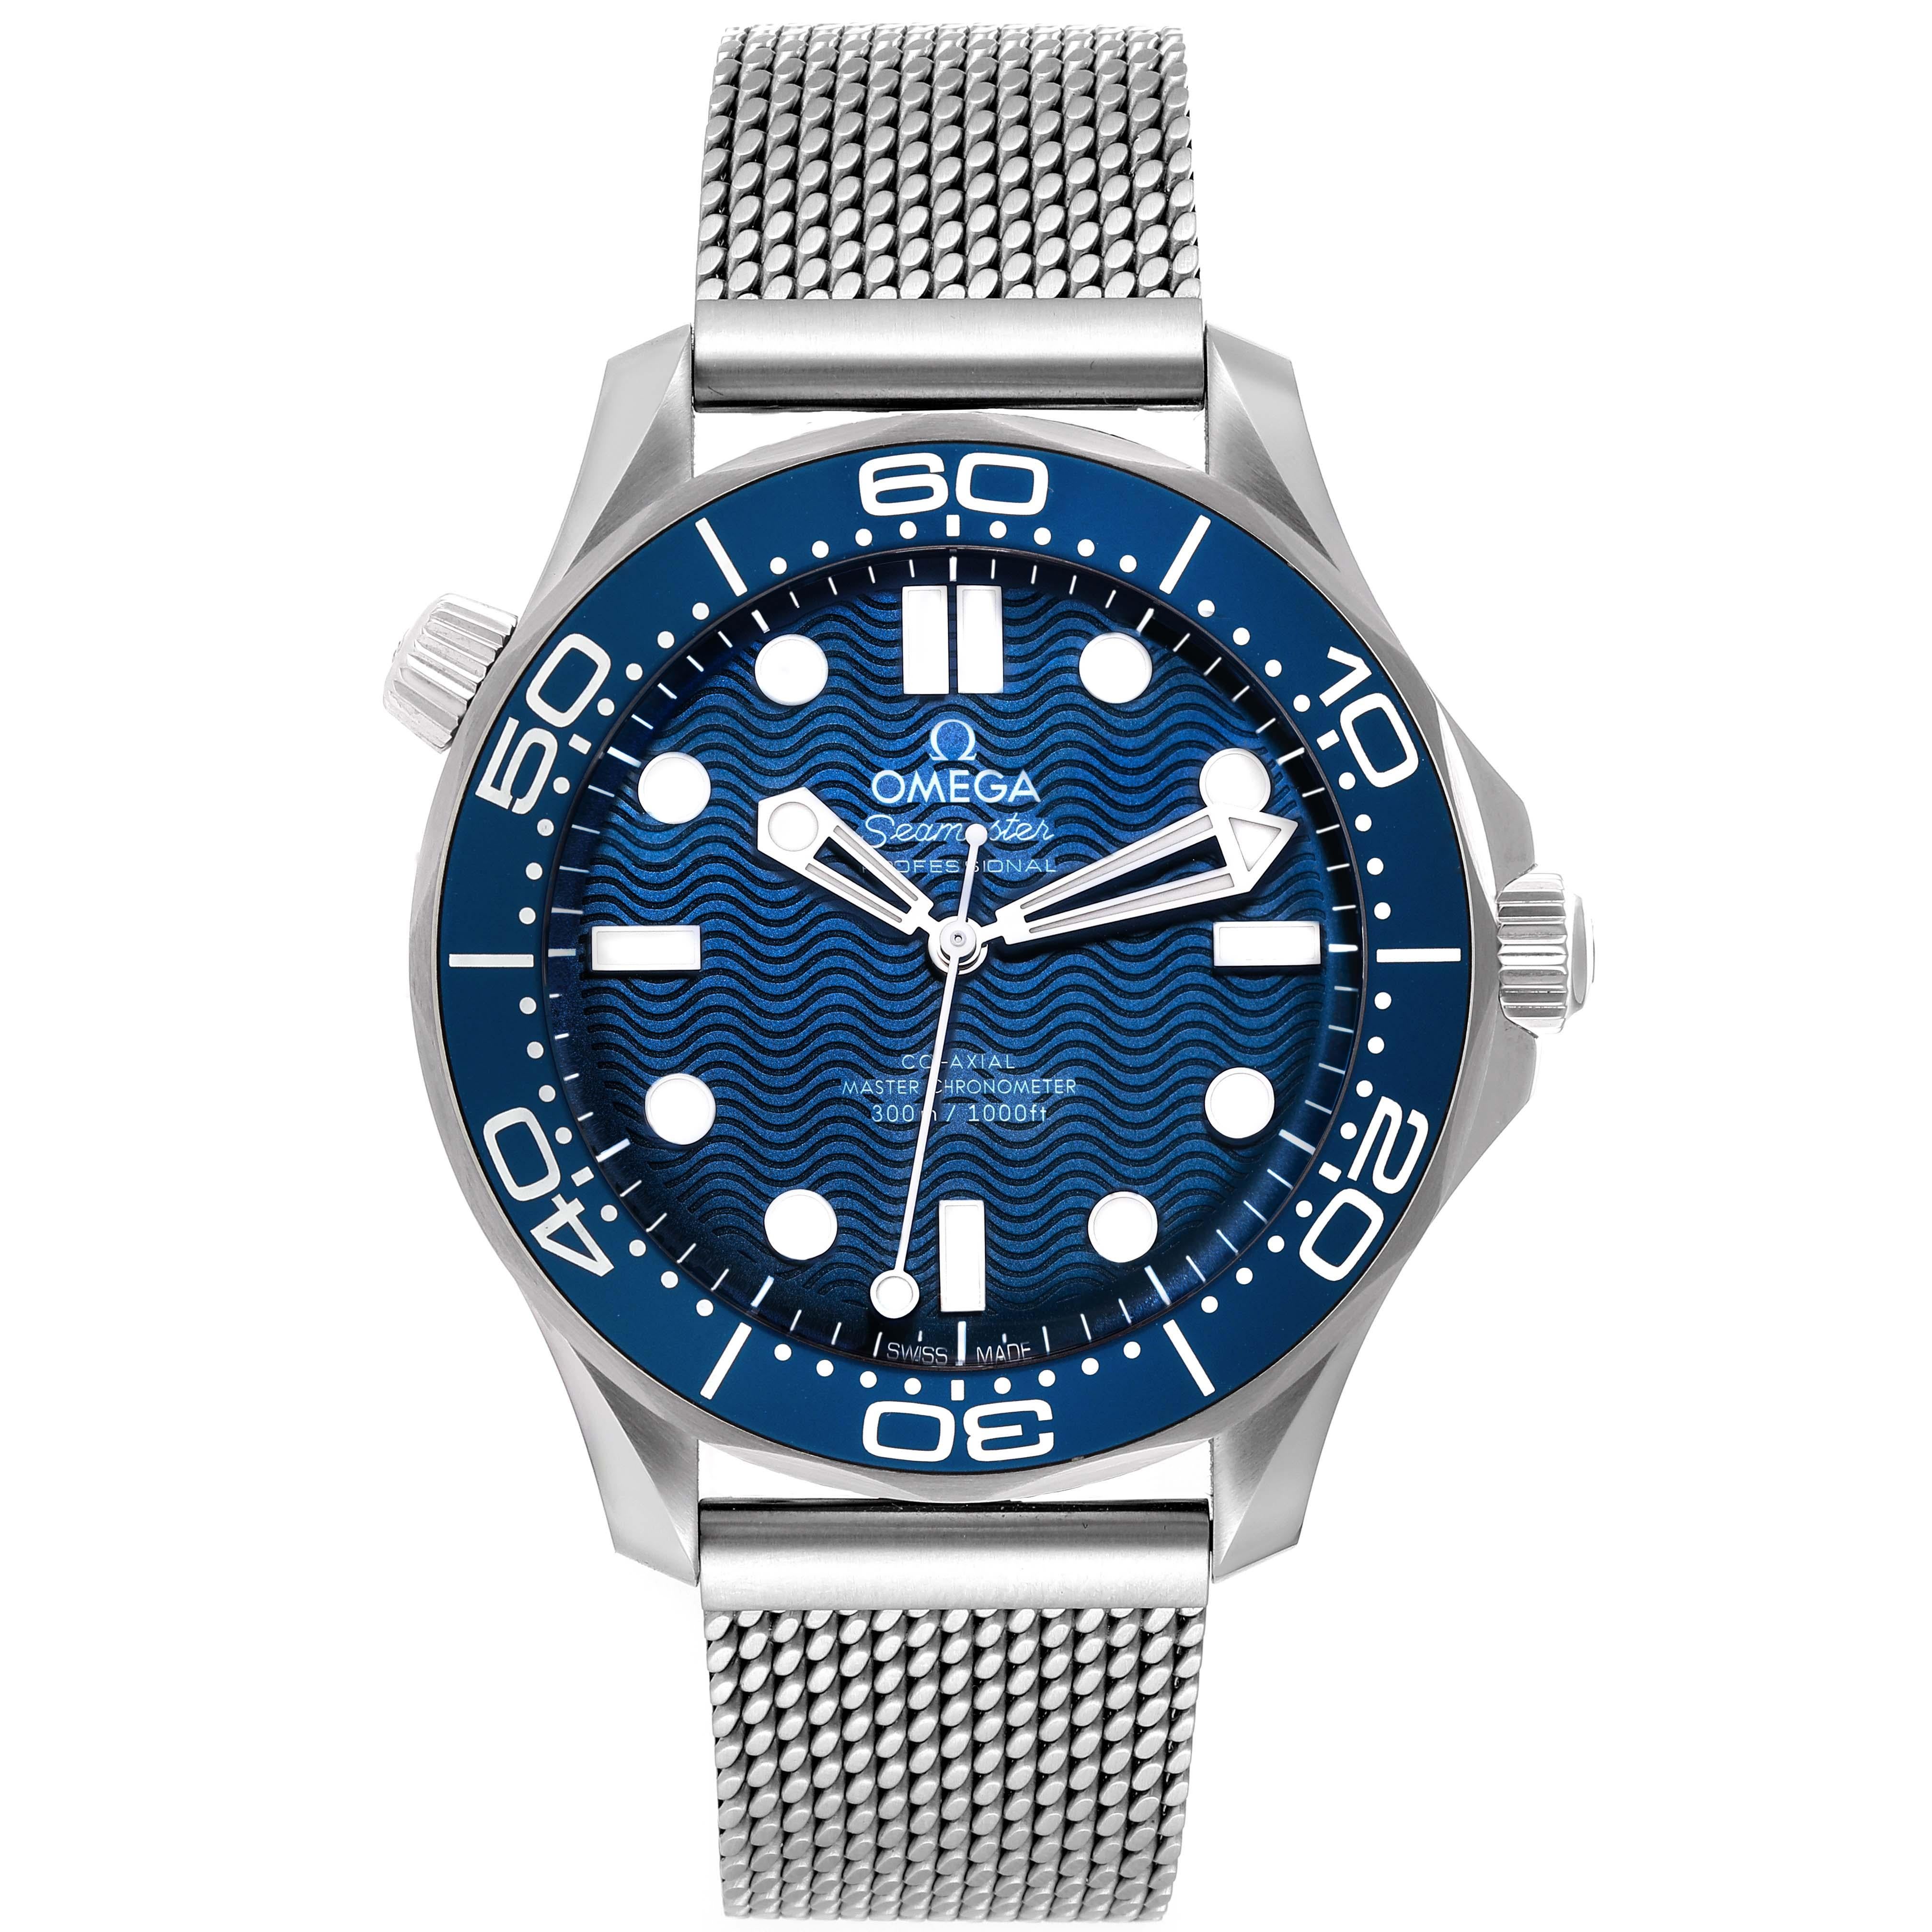 Omega Seamaster Diver James Bond Steel Mens Watch 210.30.42.20.03.002 Box Card. Automatic self-winding chronometer, Co-Axial Escapement movement with rhodium-plated finish. Stainless steel case 42.0 mm in diameter. Helium escape valve at 10 o'clock.